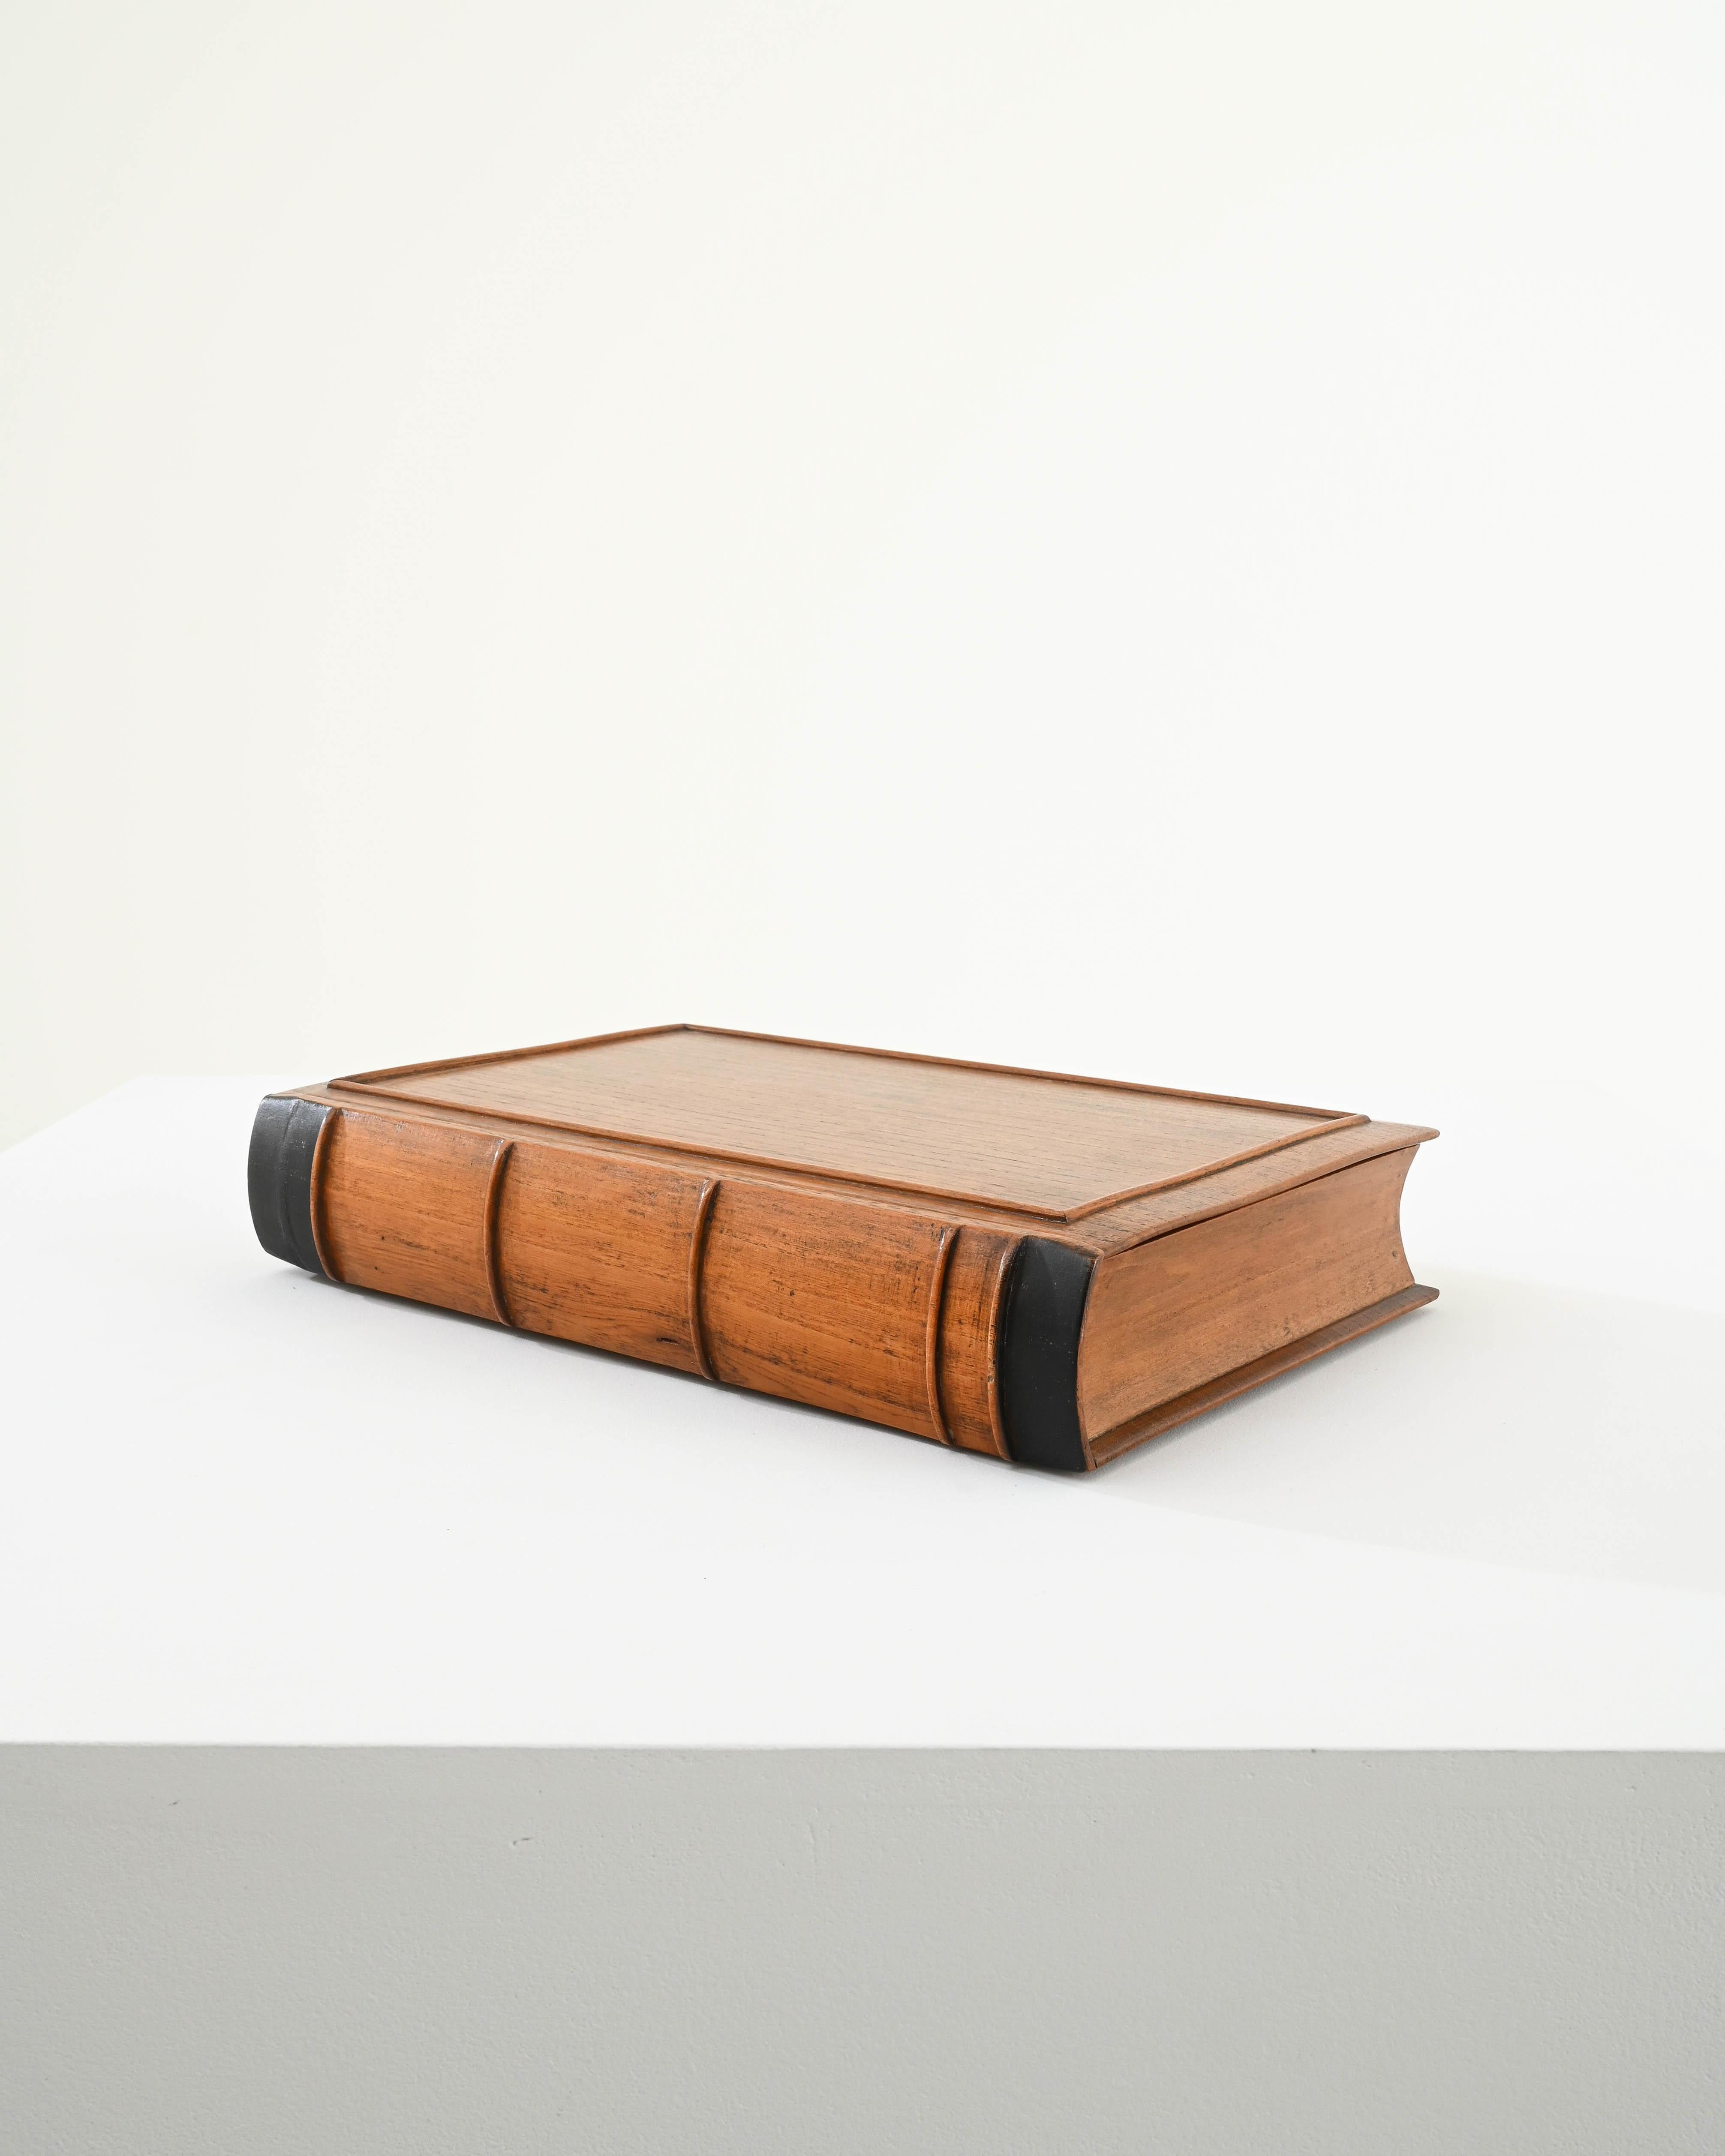 Whimsical and unique, this wooden box shaped like a leather-bound book is sure to delight any bibliophile. A realistic and detailed appearance, hand carved in oak creates a discrete and charming appearance. The front cover of the book lifts apart to